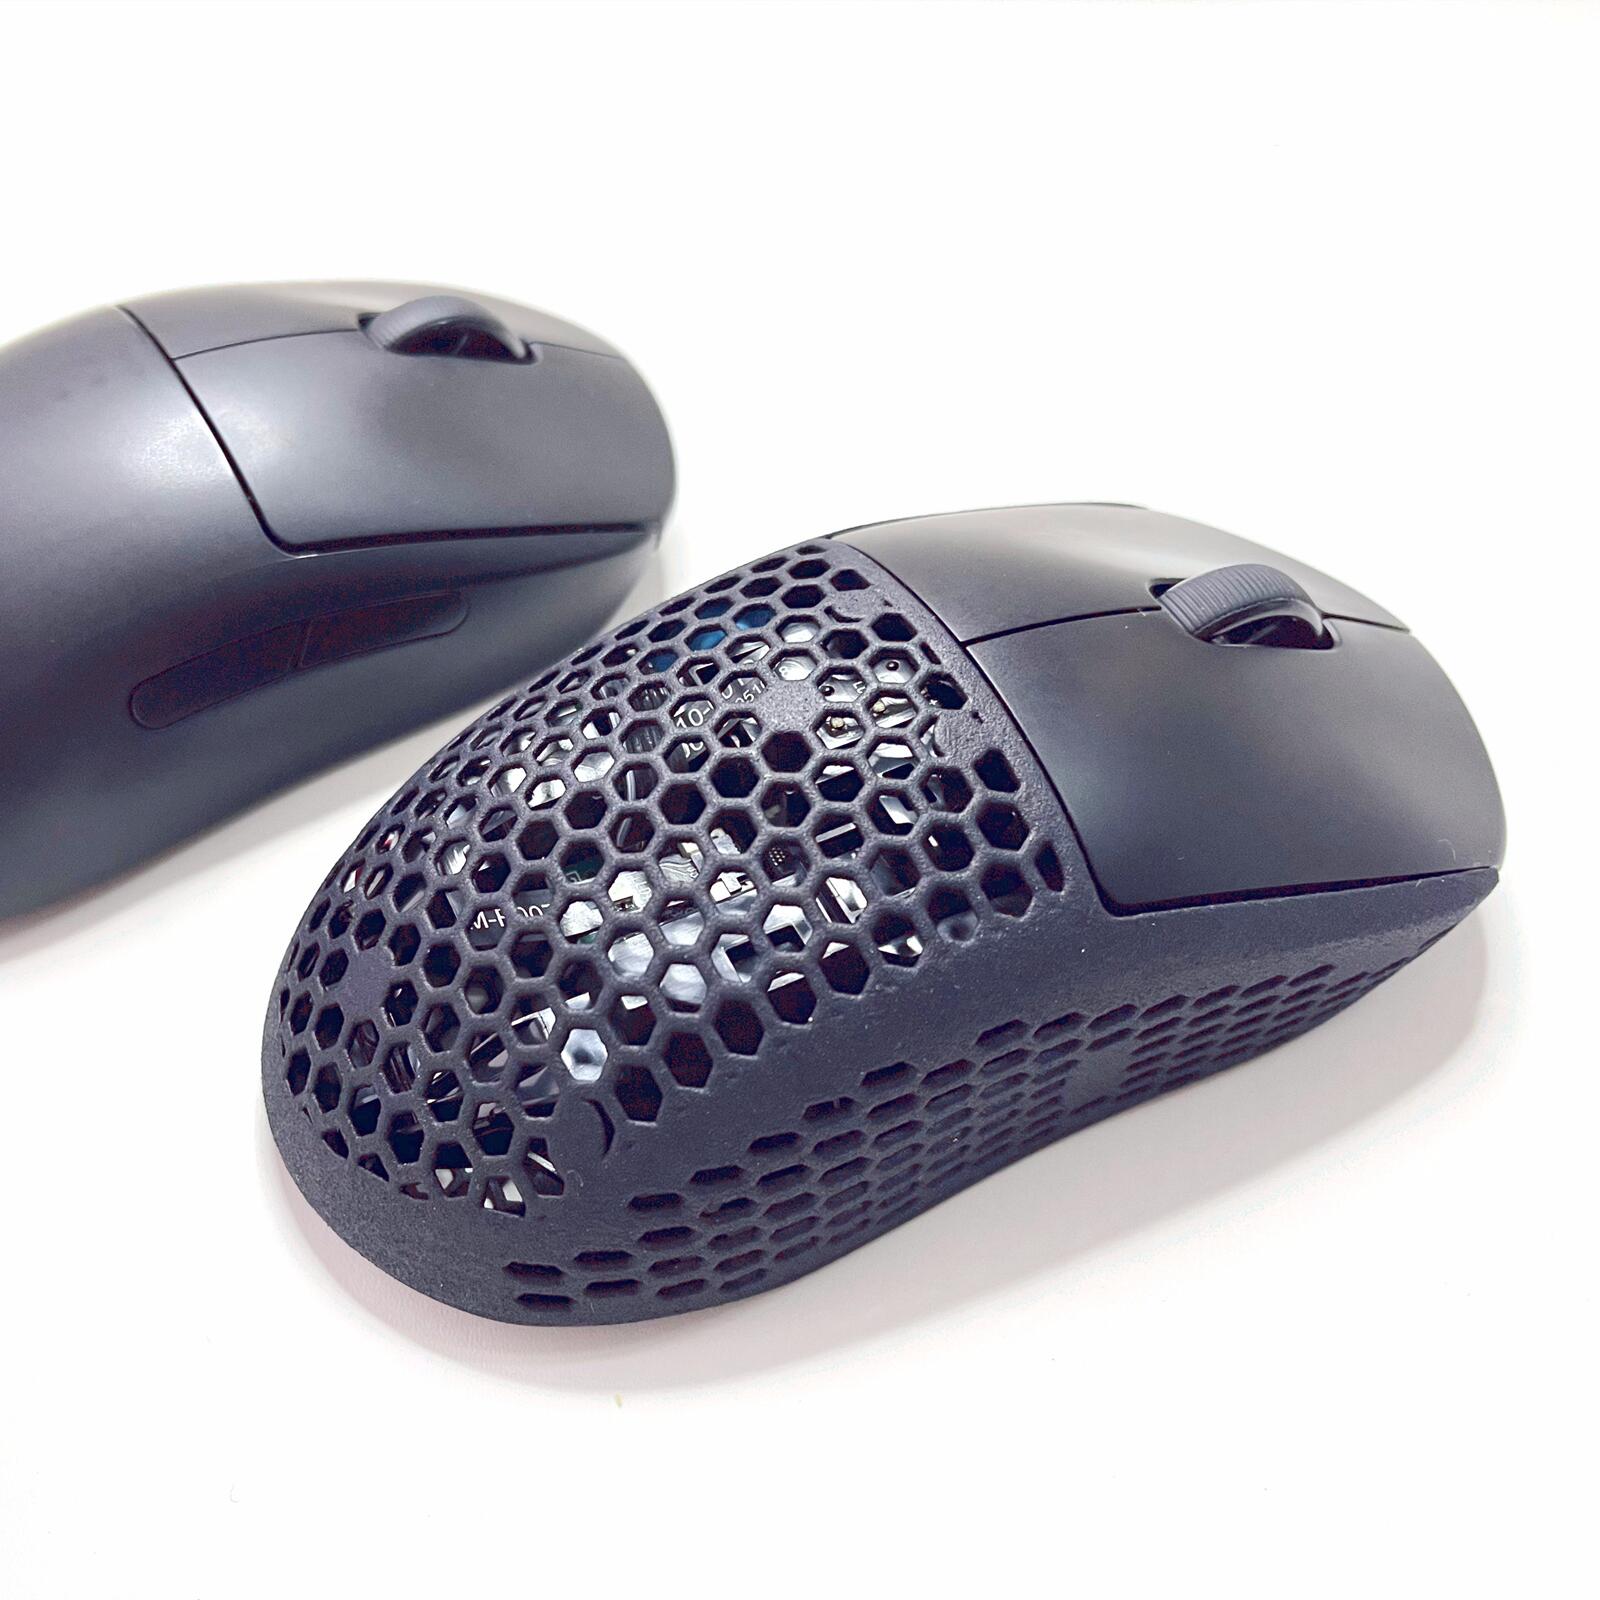 G Pro Wireless (GPW) Ultralight Weight Reduction Honeycomb Shell (Top Cover  Only)